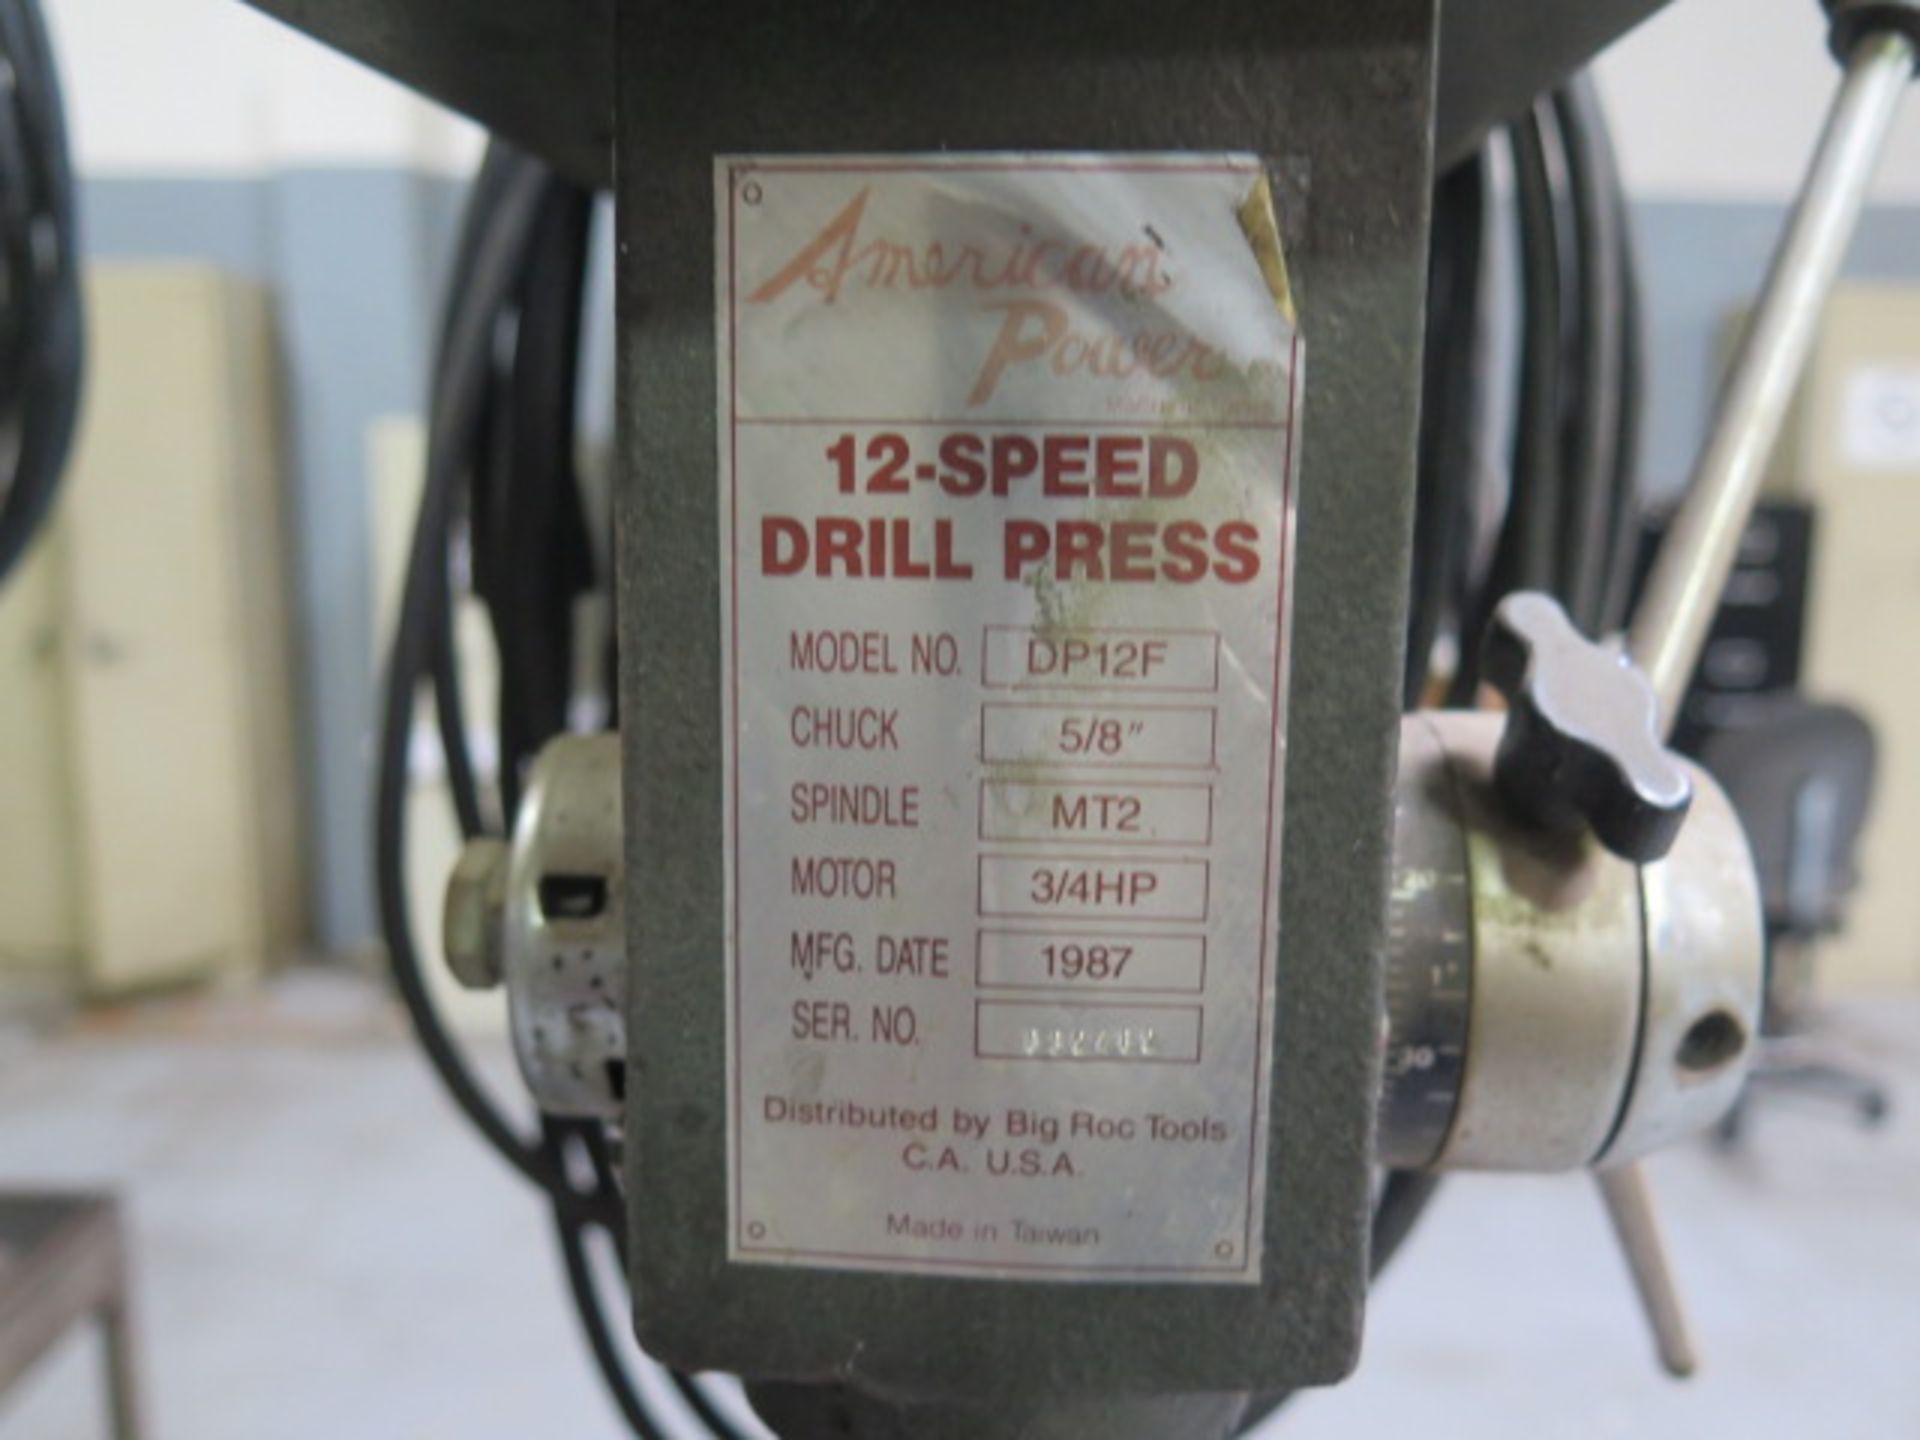 American Power Pedestal Drill Press - Image 5 of 5